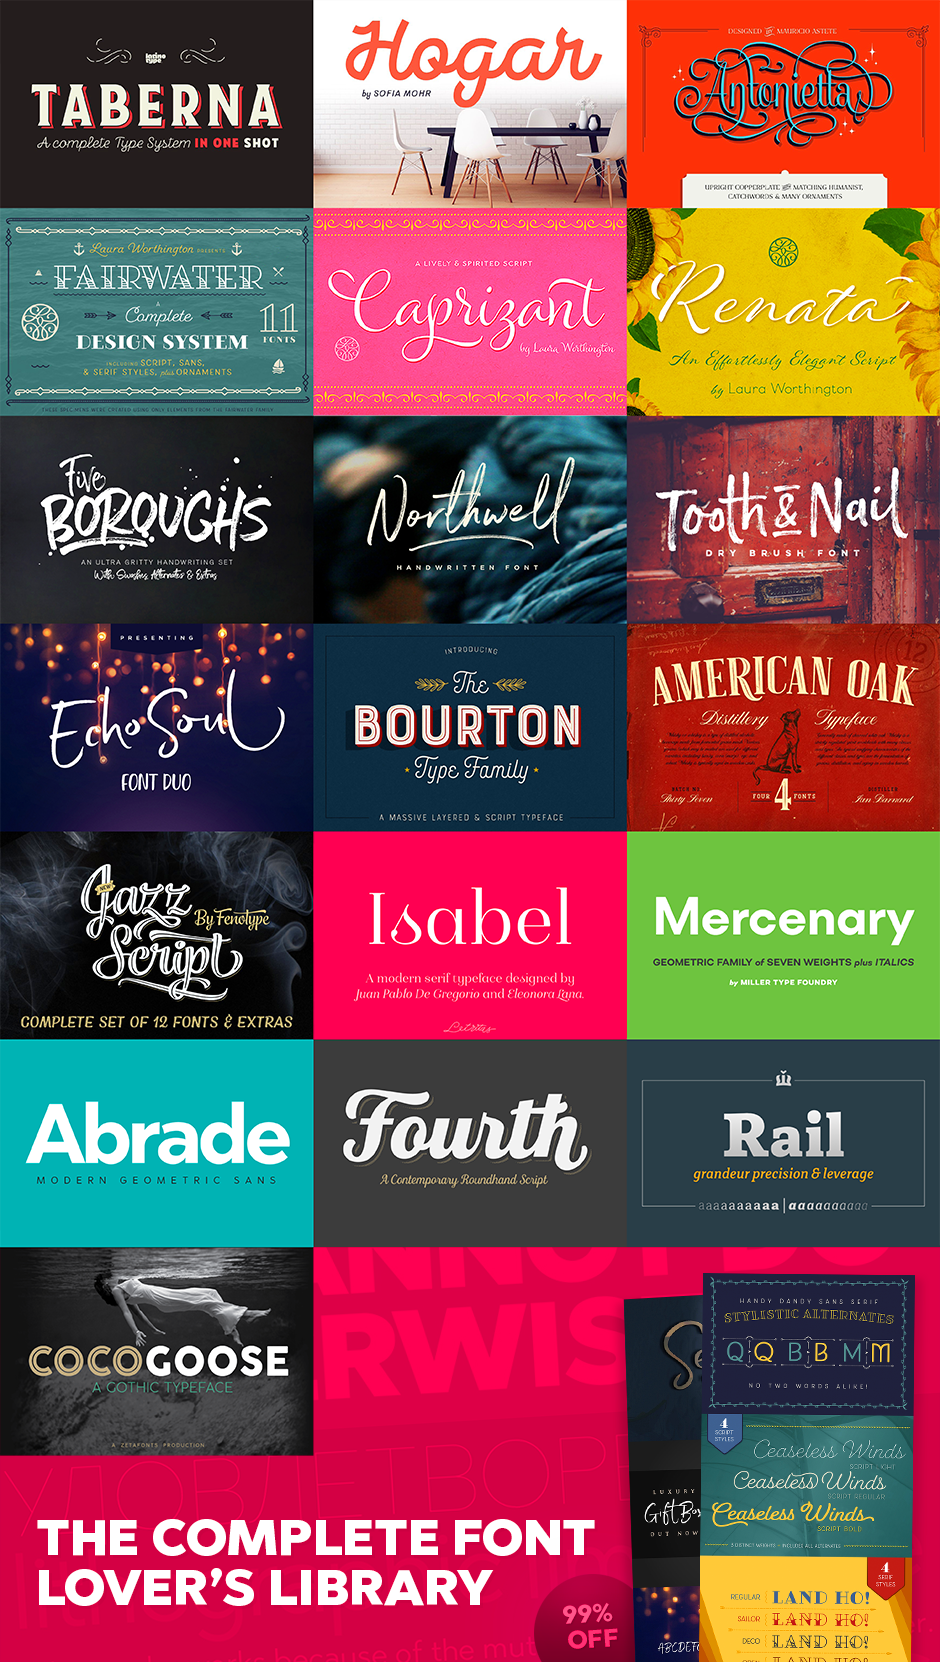 The Complete Font Lover's Library